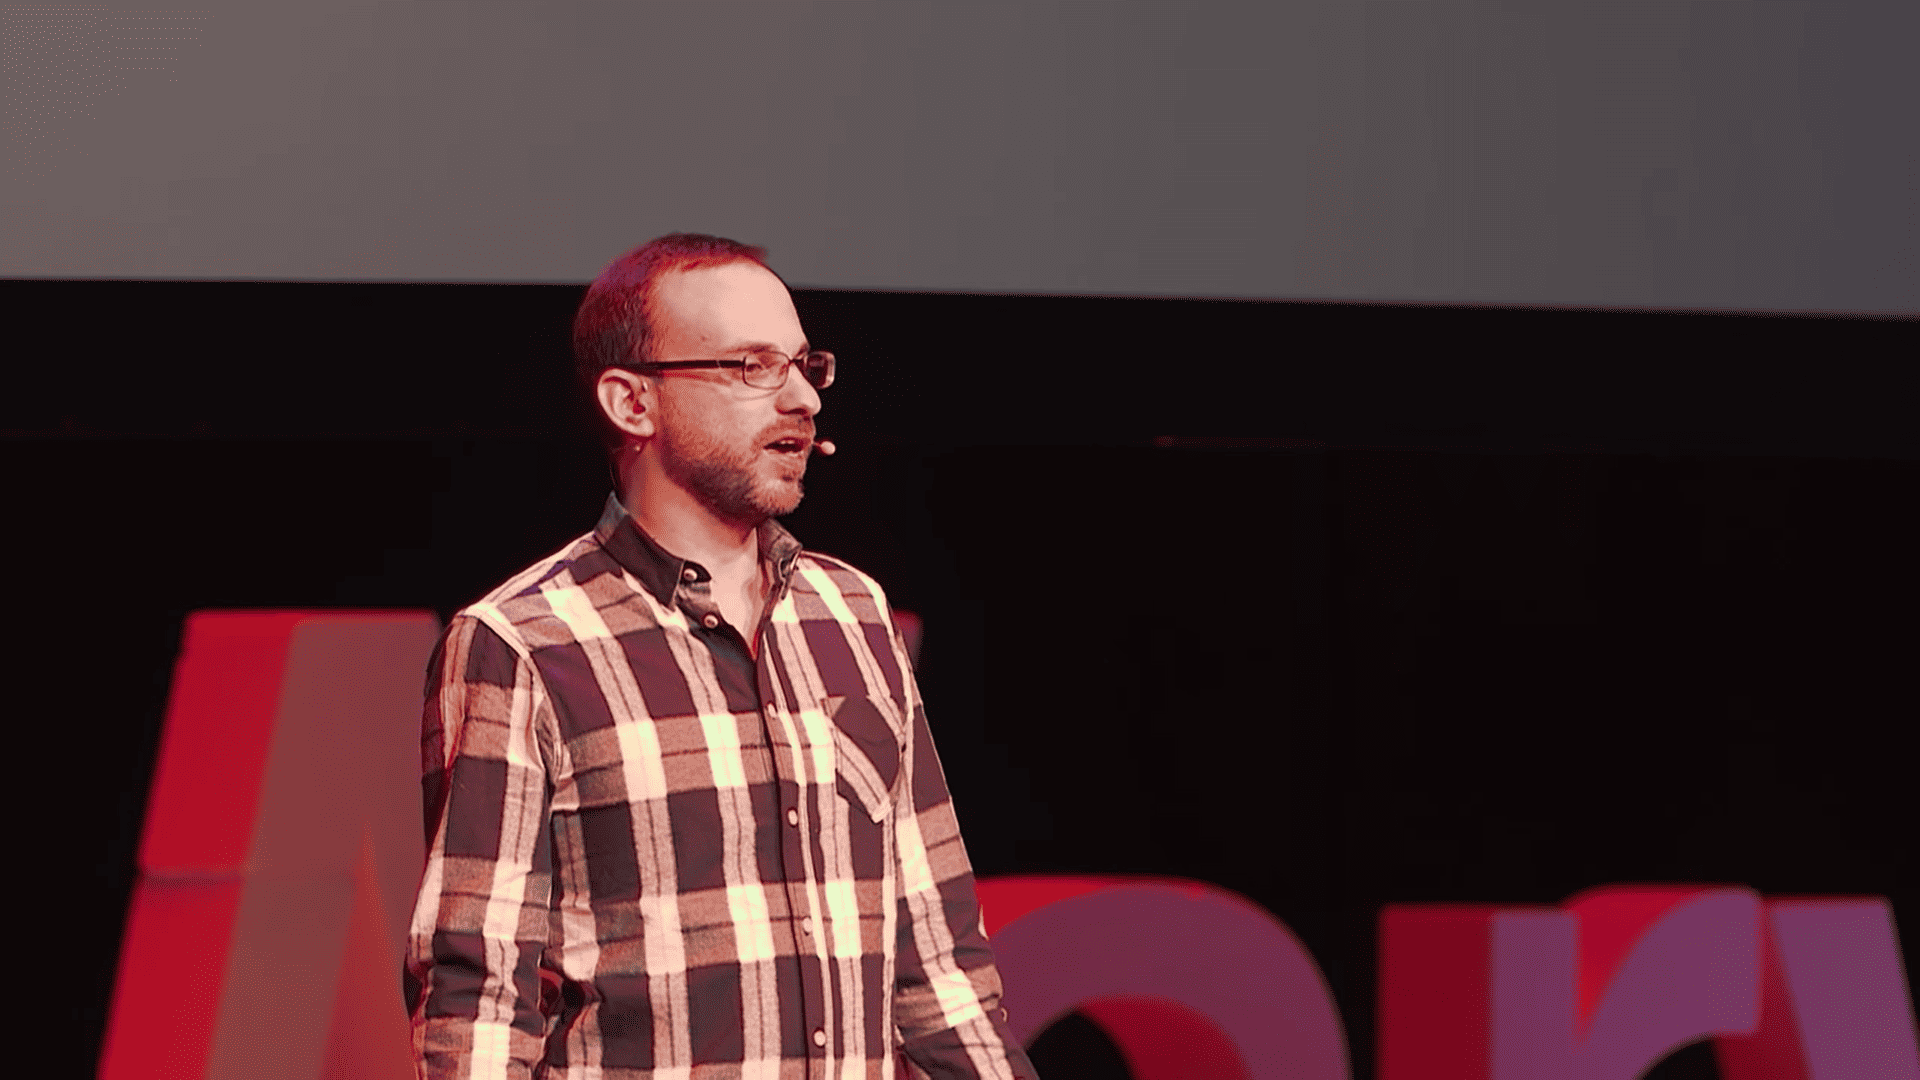 Seth Stephens-Davidowitz, a white man in a checkered shirt, giving a talk on a stage.